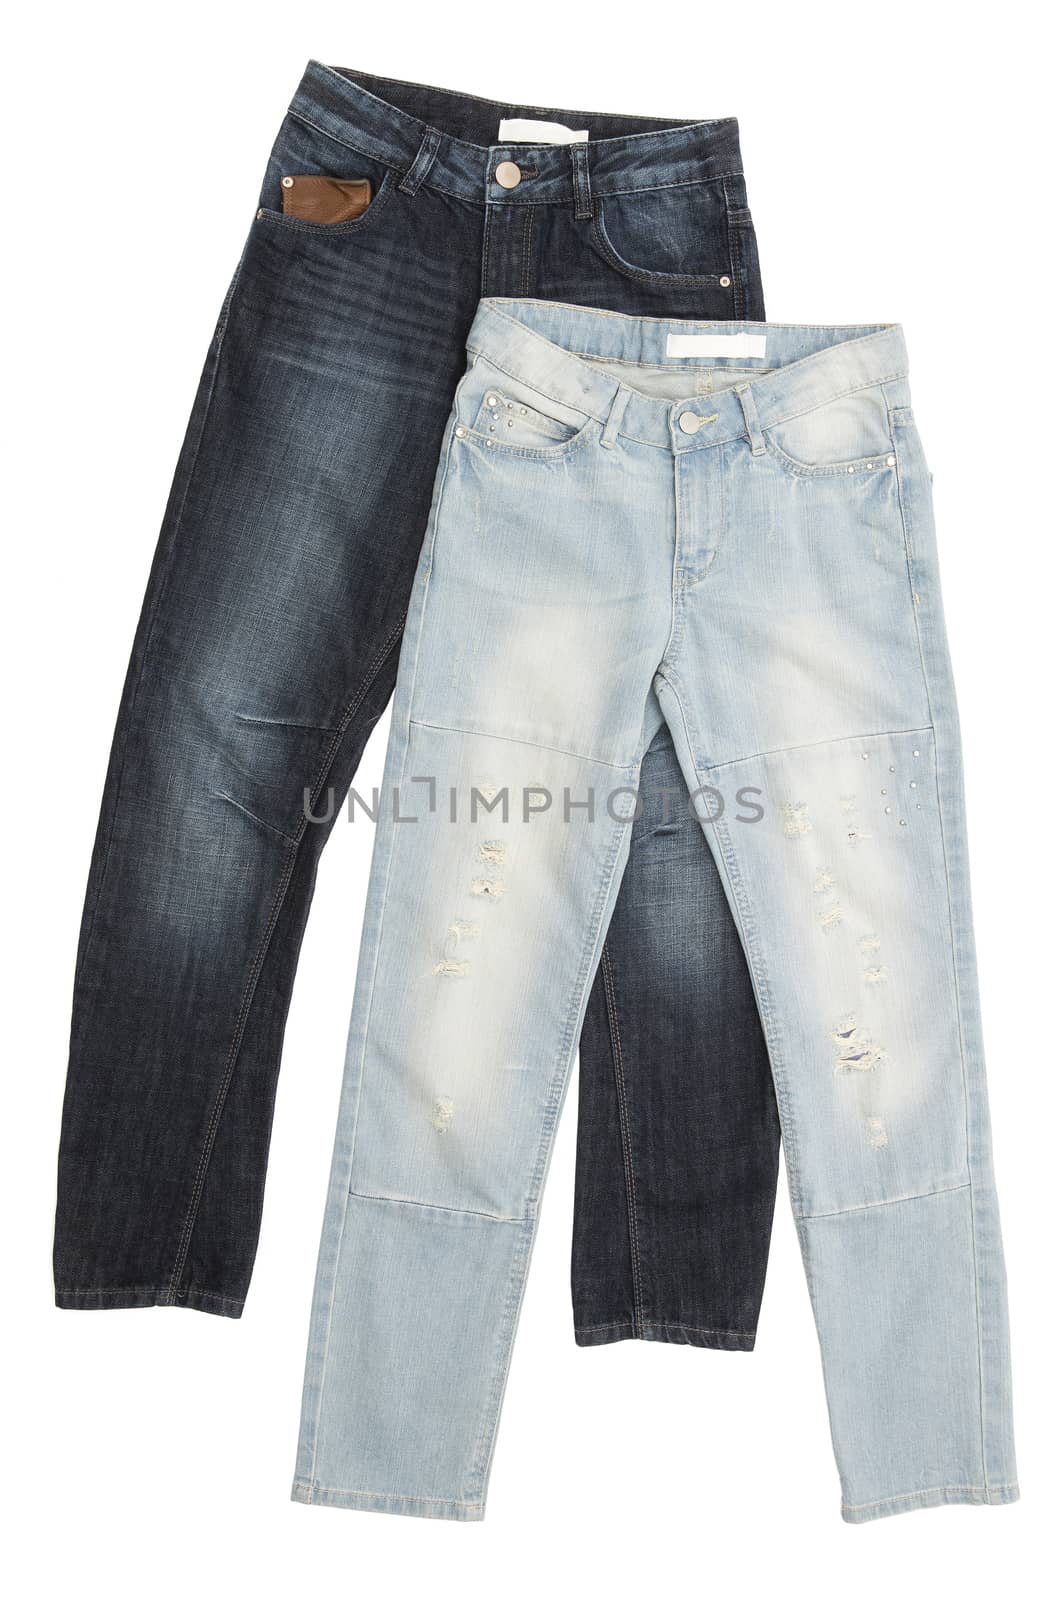 Two pair of blue jeans by gemenacom